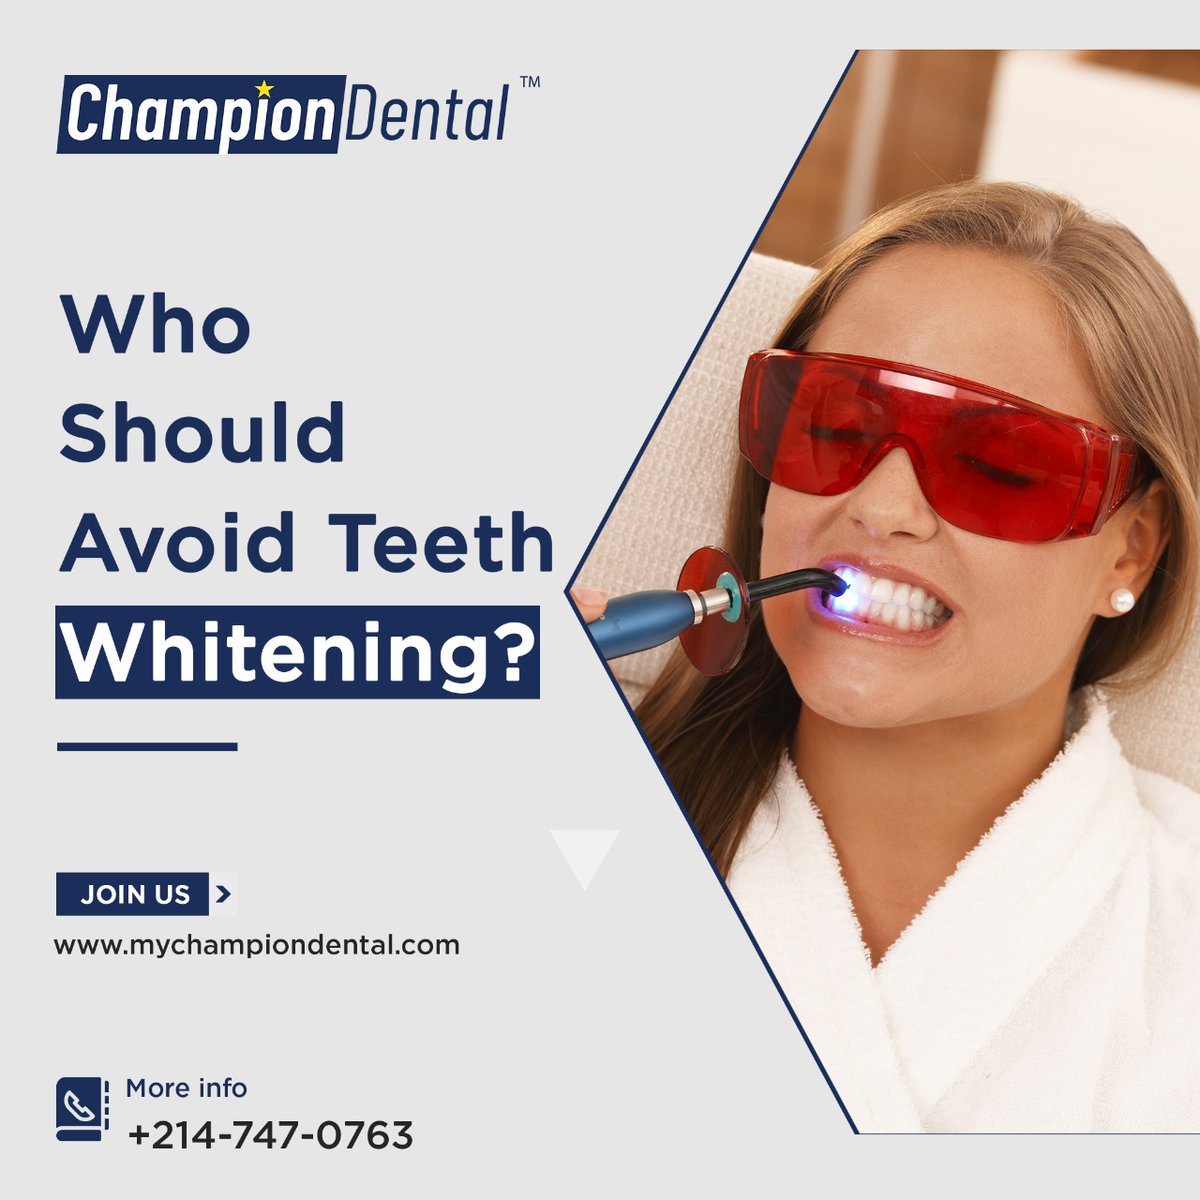 #Teethwhitening is not recommended if you've 
1. tooth-colored fillings, crowns, caps or bonding in your front teeth as the bleach will make them stand out in your newly whitened smile
2. #teethsensitivity
call 214-747-0763 #freewhitening for life -T&Capply #fbtx #dentalcare #dfw